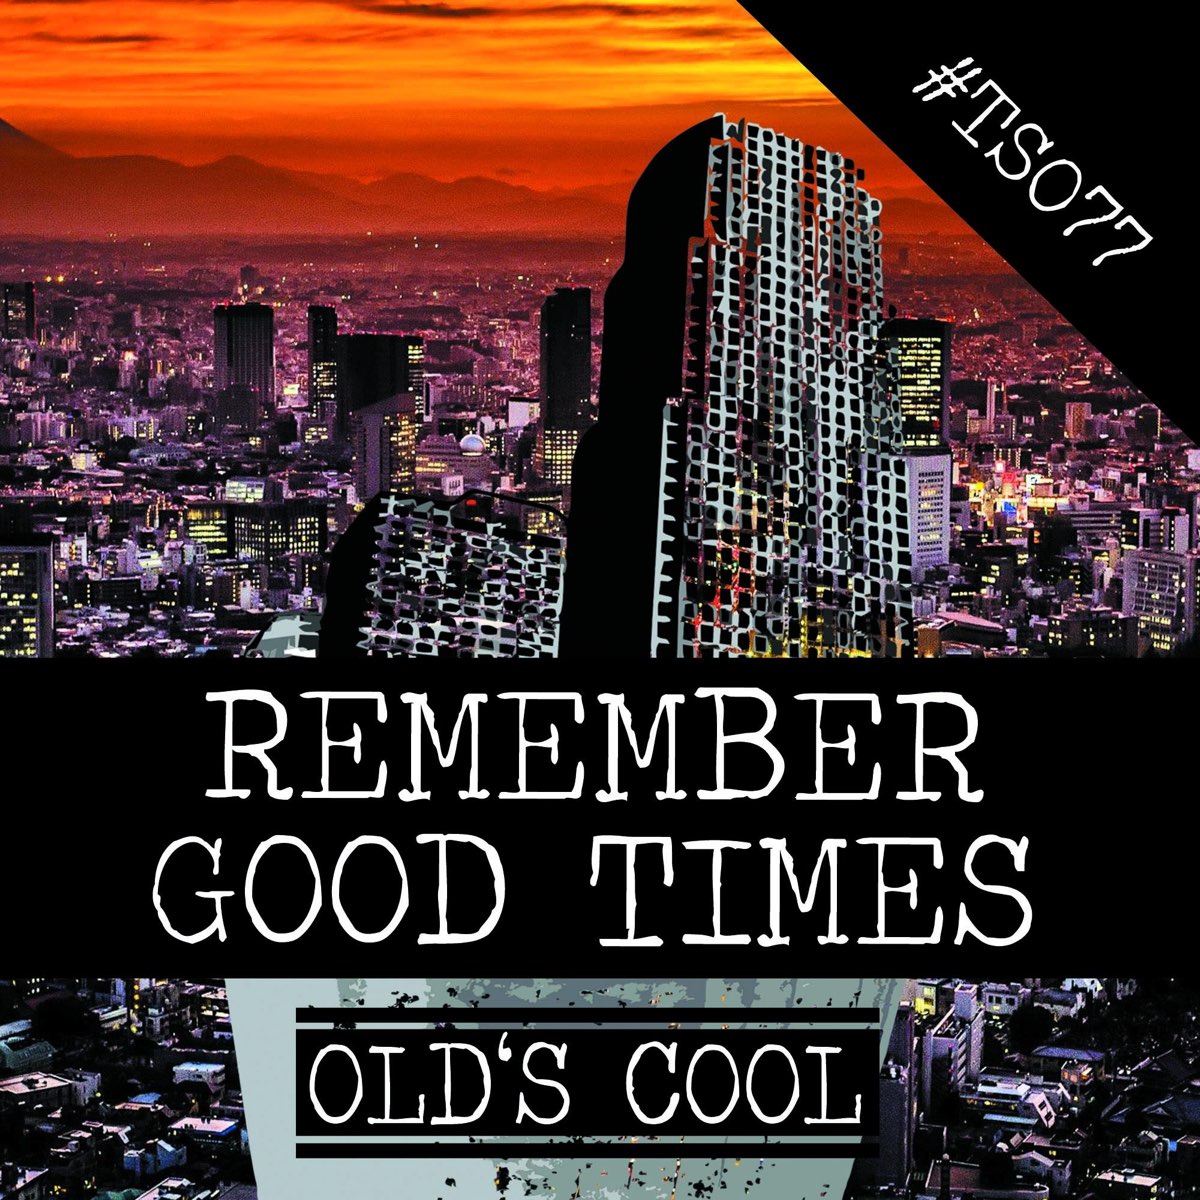 Remember the good times. Good times слушать. Best time. Good times Celebration Society. Good times di young •.